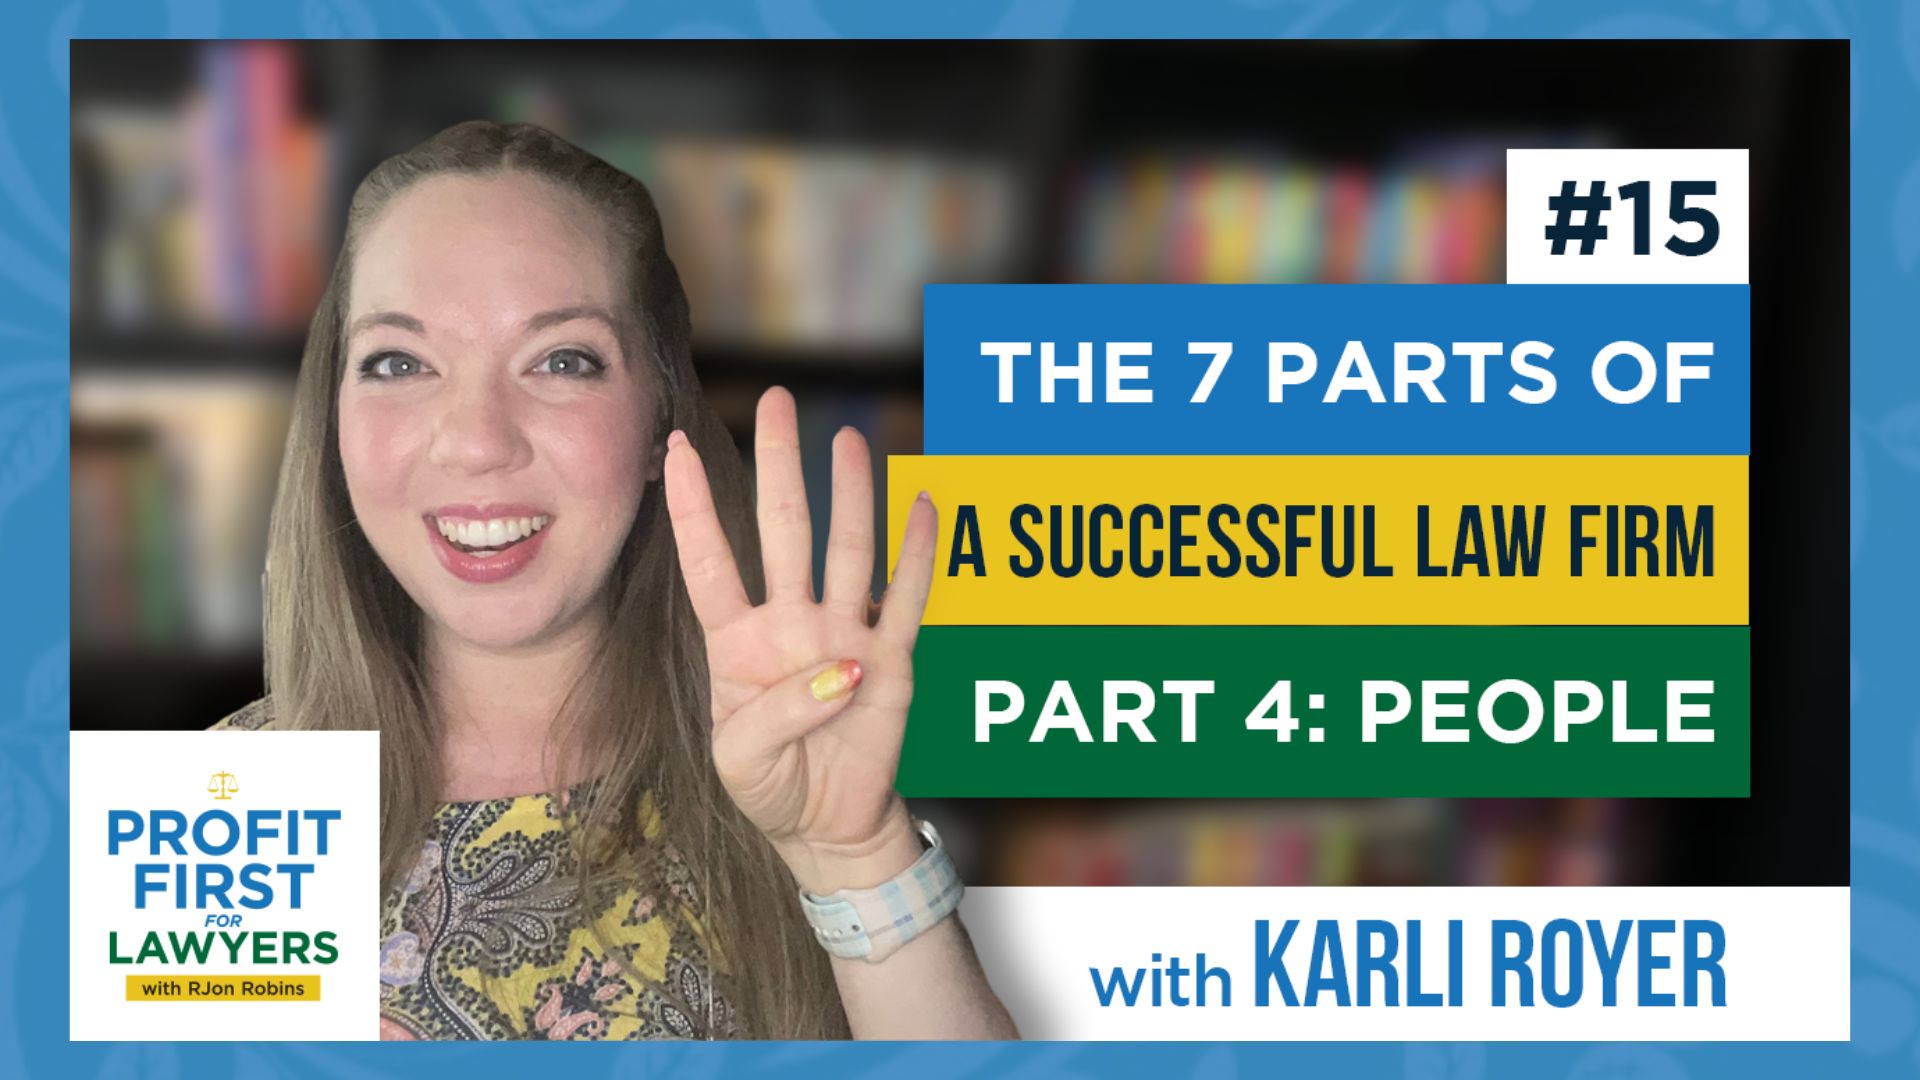 Profit First For Lawyers featured image for episode 15 shows Karli Royer holding up four fingers and smiling. Title of episode: The 7 Parts of A Successful Law Firm Part 4: People